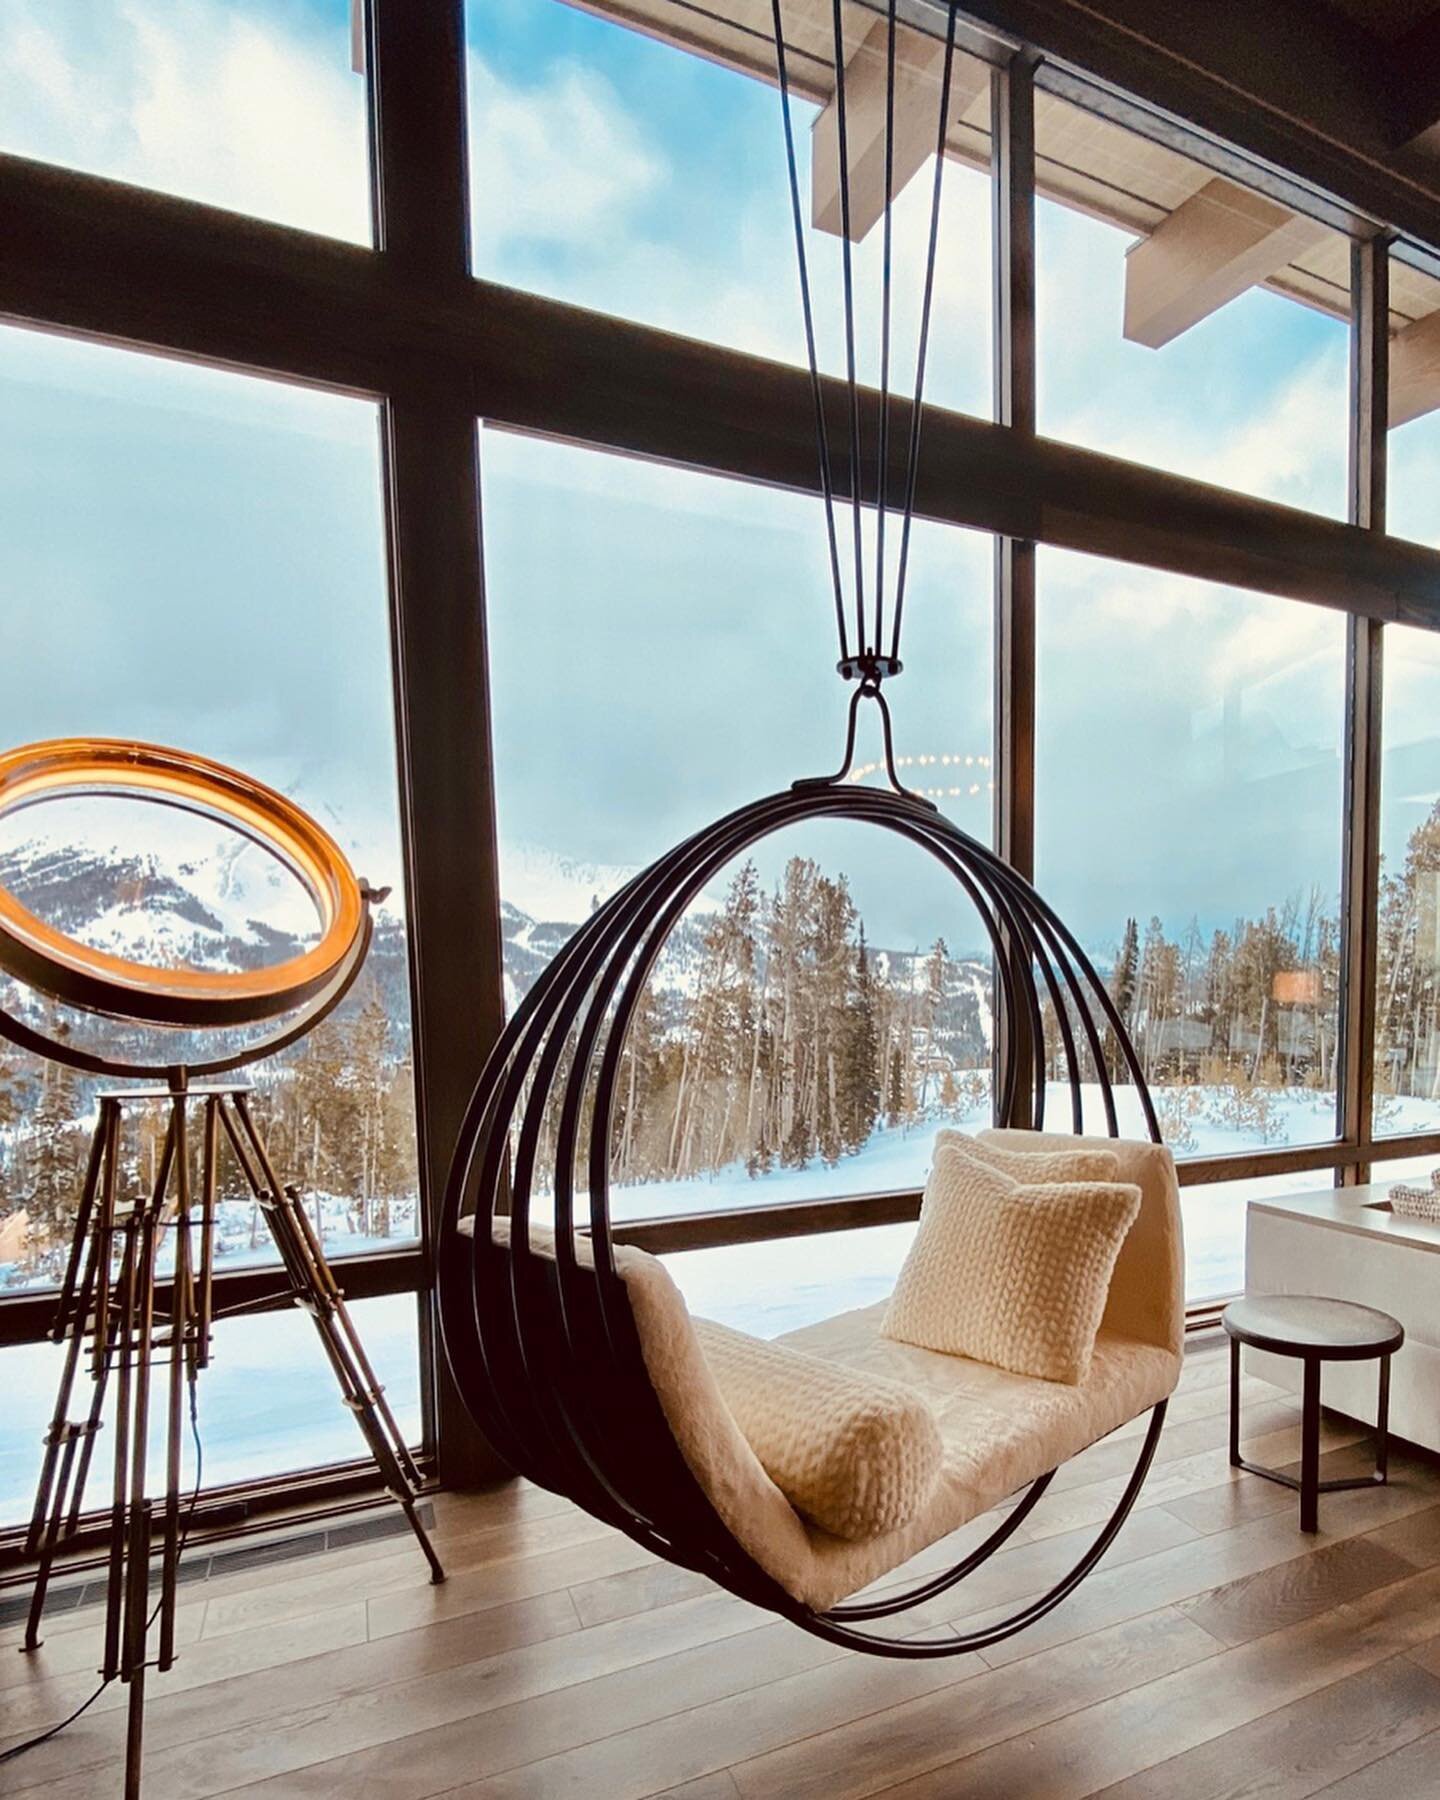 Nice place for an apr&egrave;s ski swing! Four solid steel rods suspend this black steel swing from the I-beam sixteen feet above. 
#customfurniture #metalwork #madeinmontana #livingstonmt